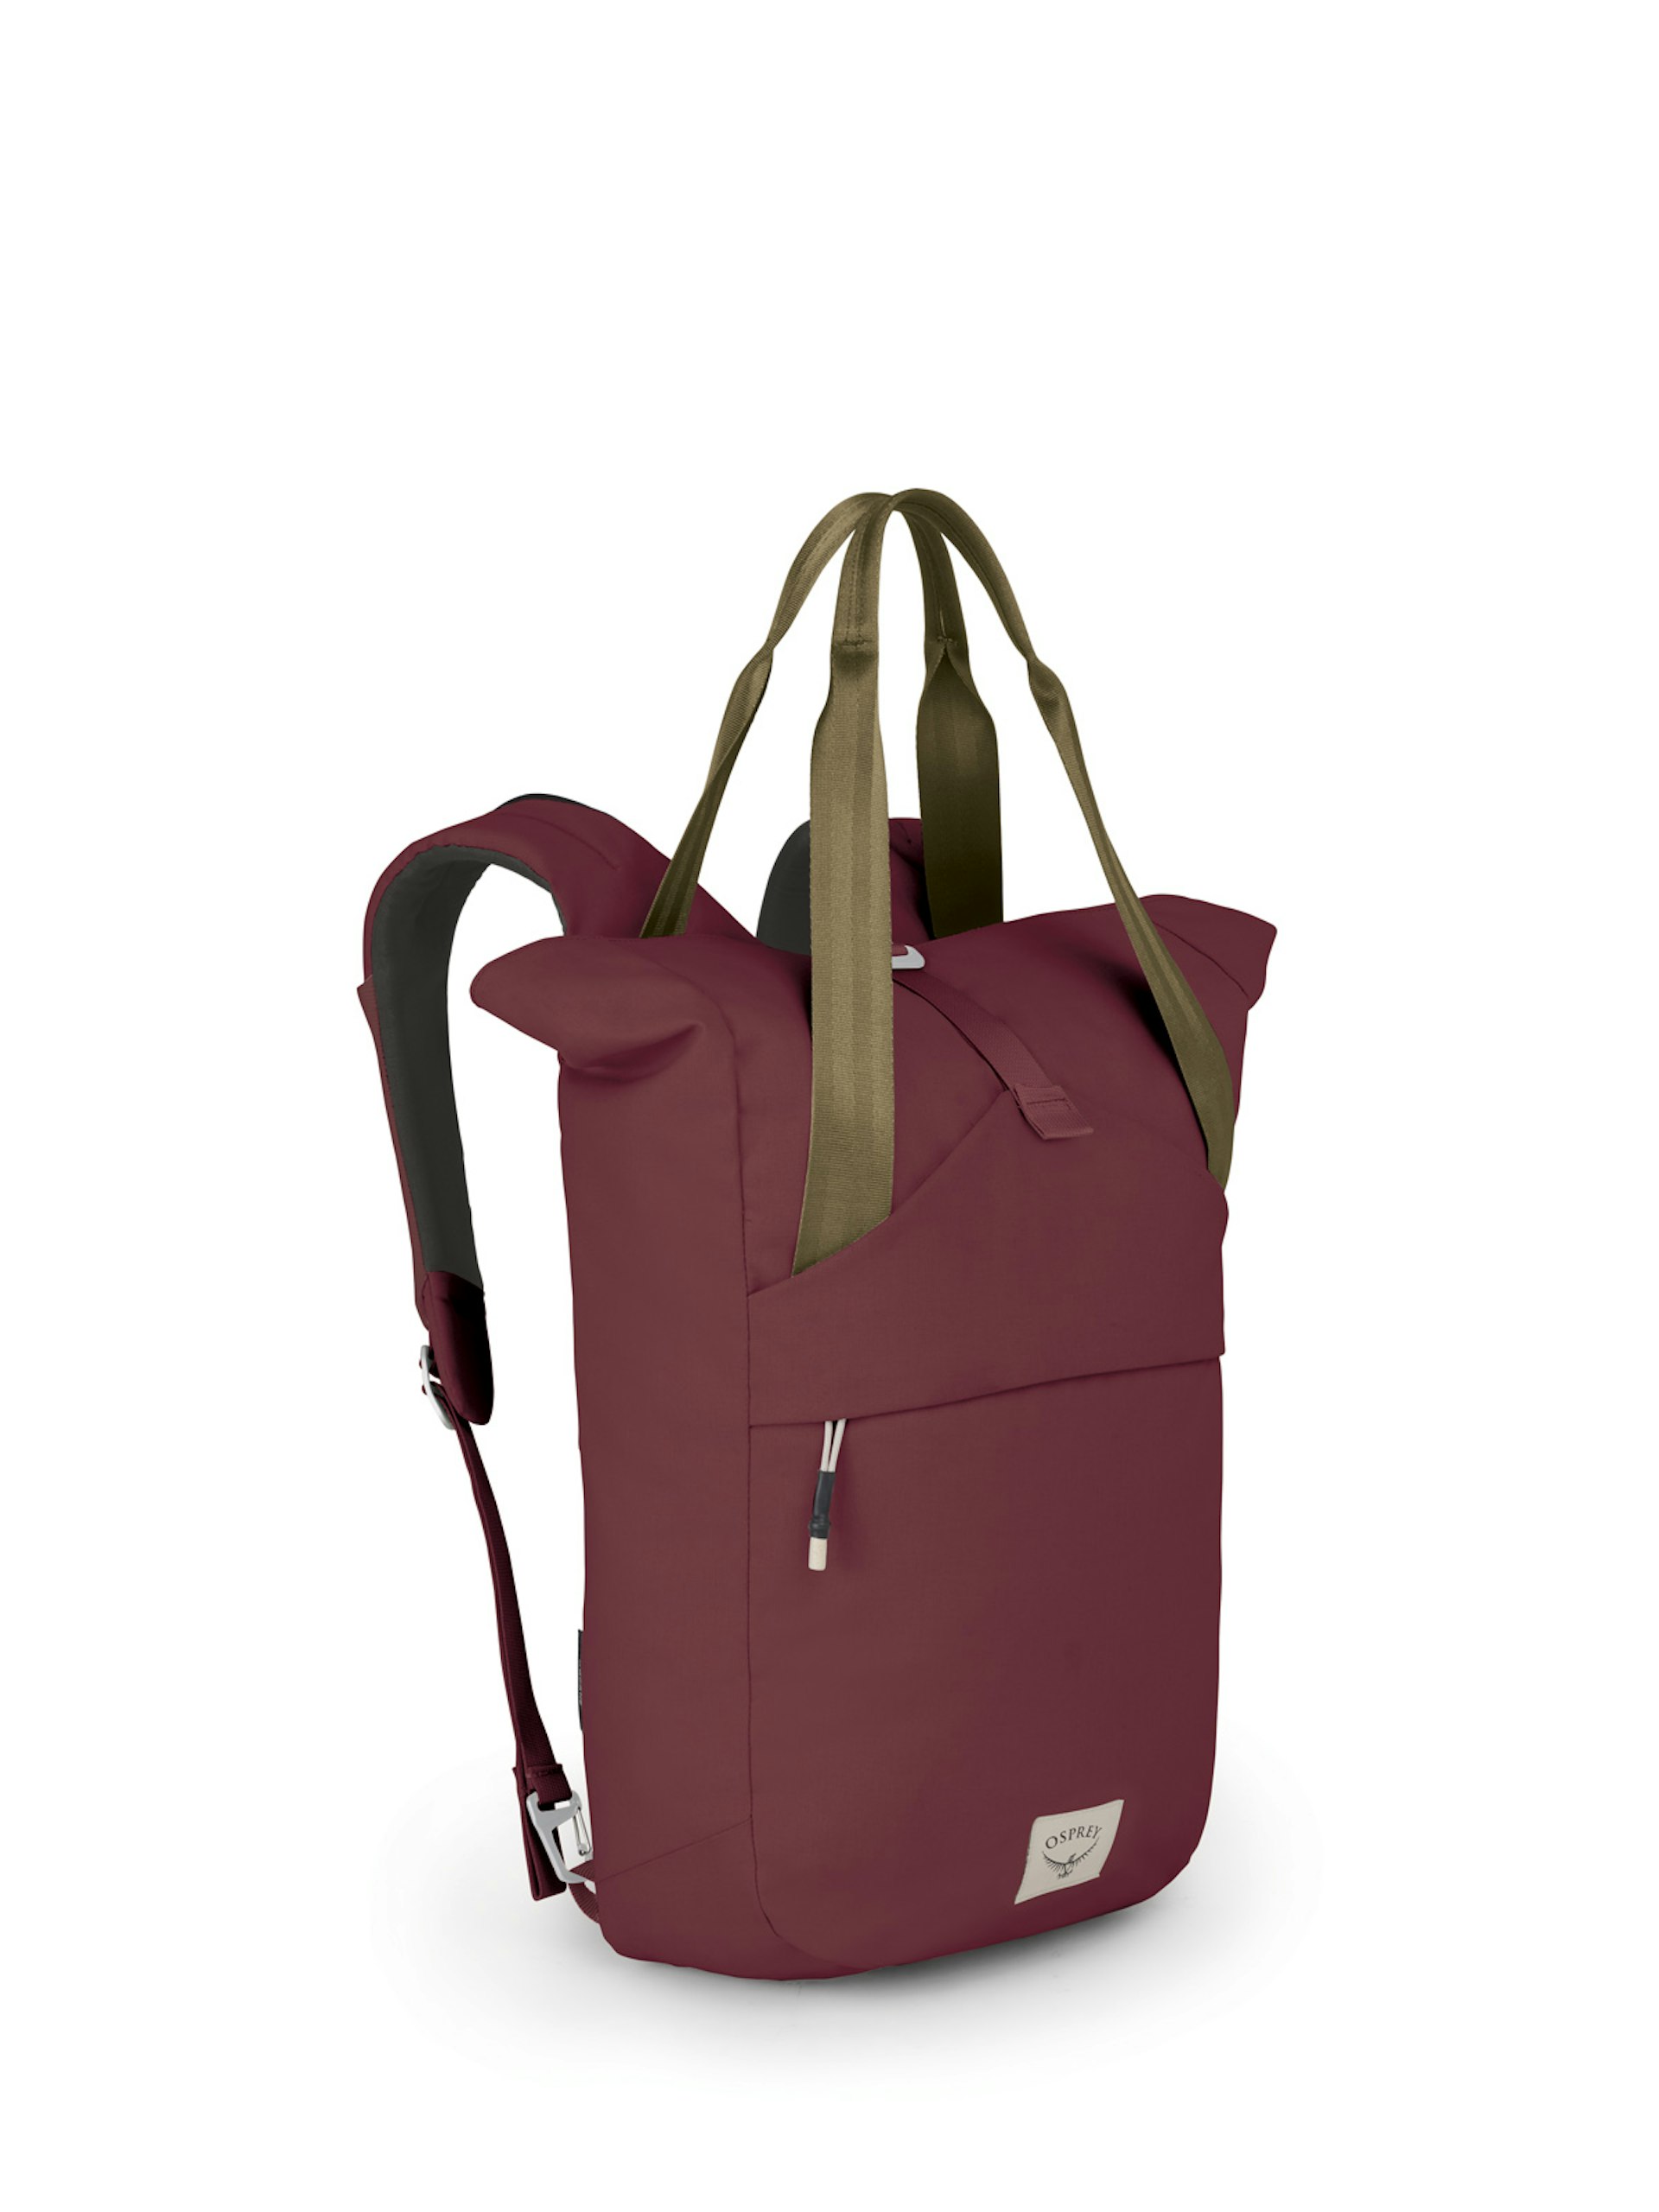 a burgundy colored bucket bag with tote straps and backpack straps